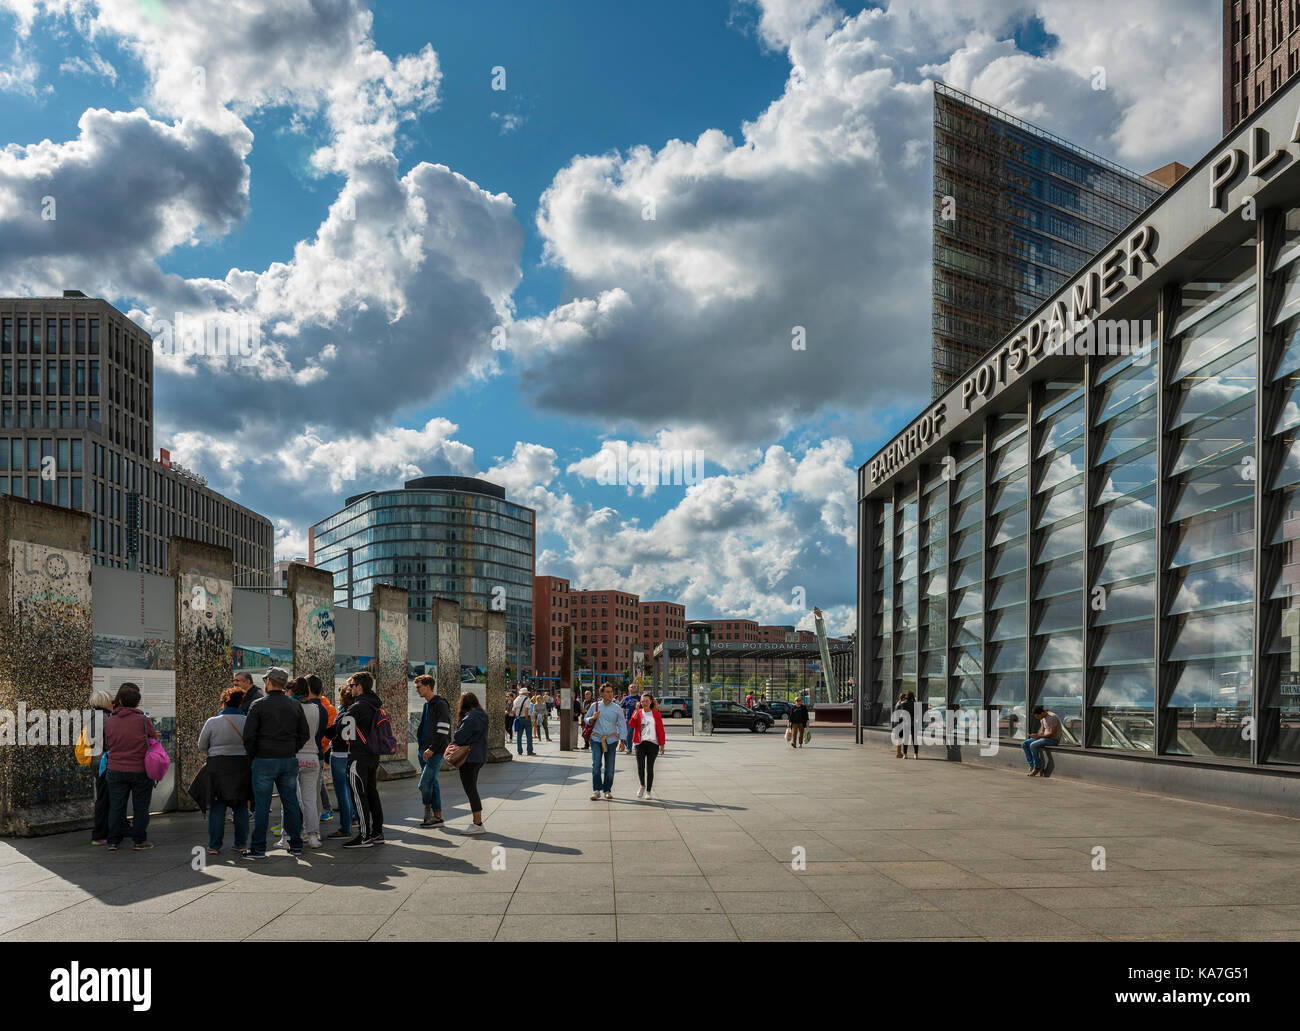 Tourists and passers-by at Potsdamer Platz railway station, remains of the Berlin Wall, Berlin, Germany Stock Photo